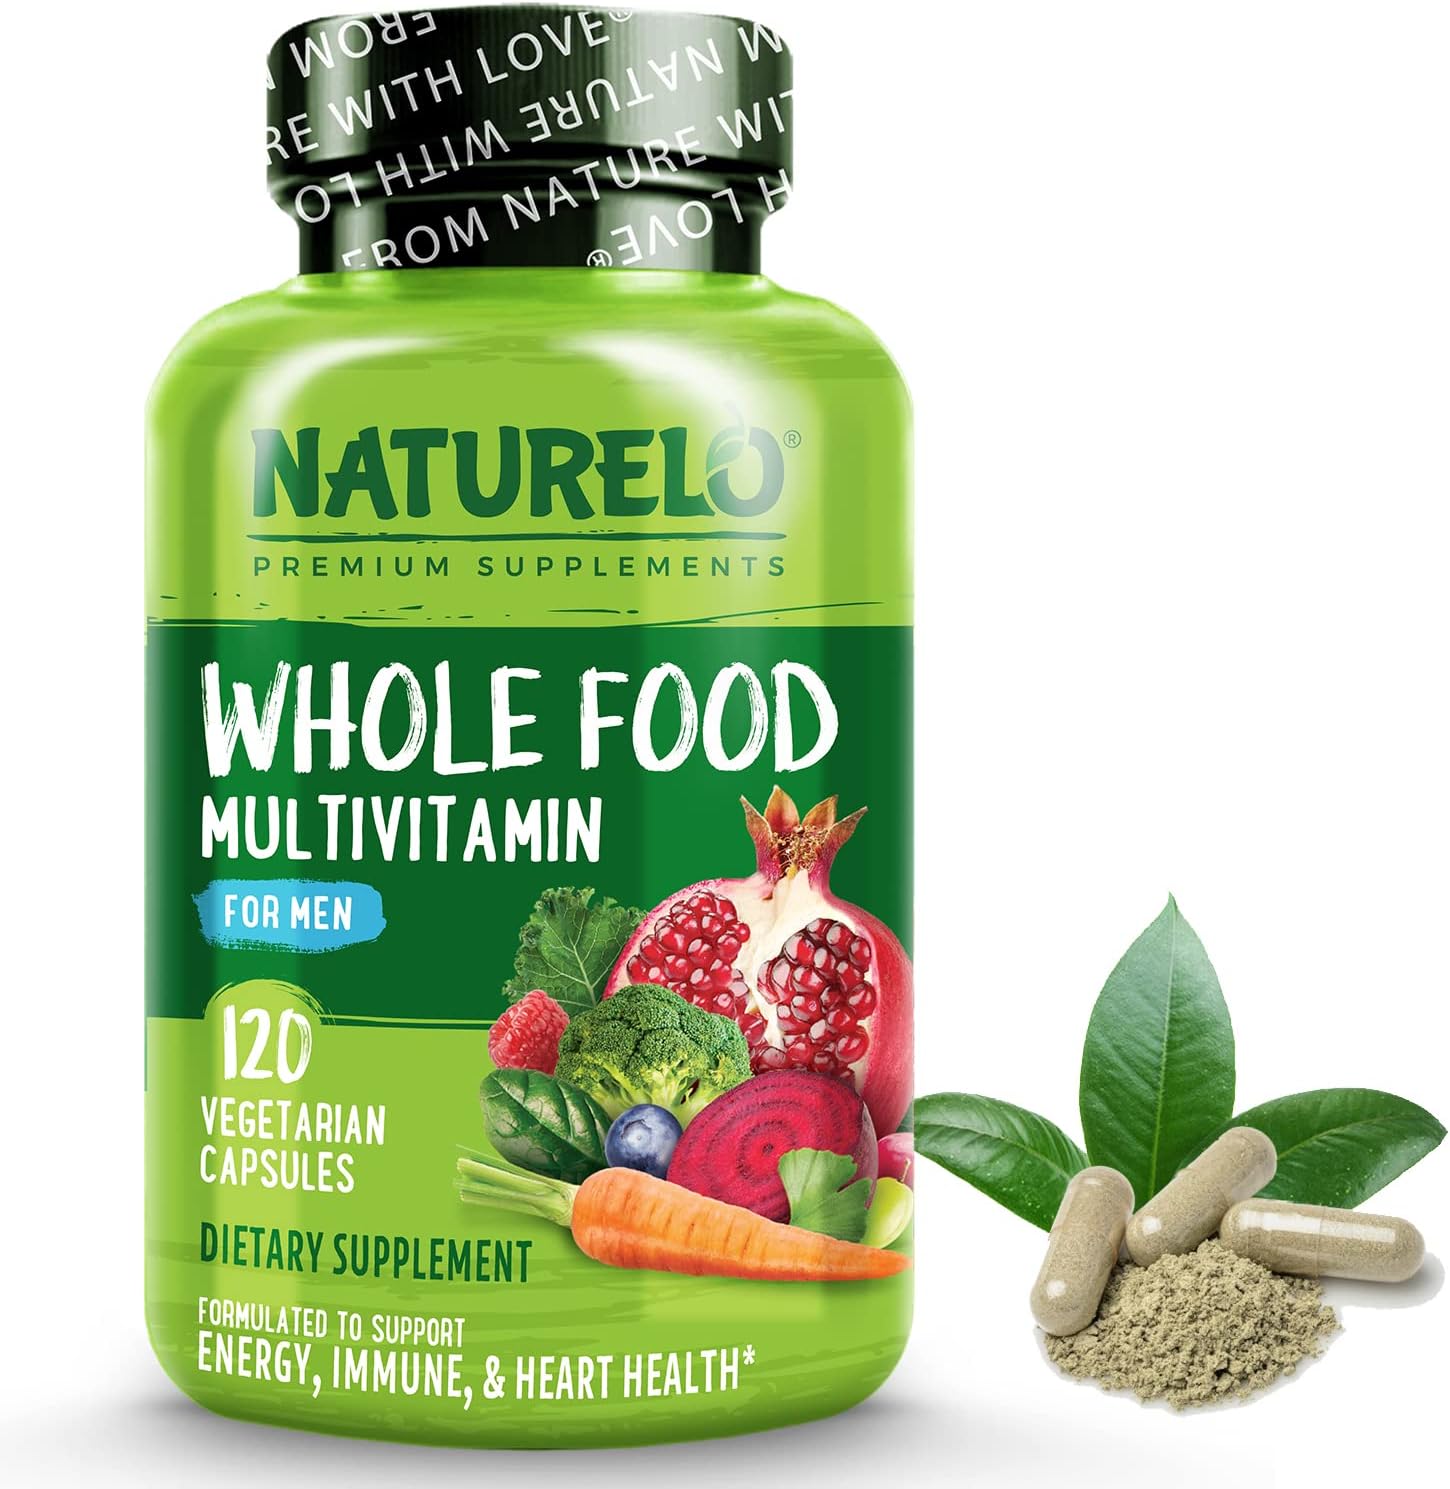 NATURELO Whole Food Multivitamin for Men - with Vitamins, Minerals, Organic Herbal Extracts - Vegetarian - for Energy, Brain, Heart, Eye Health - 120 Vegan Capsules